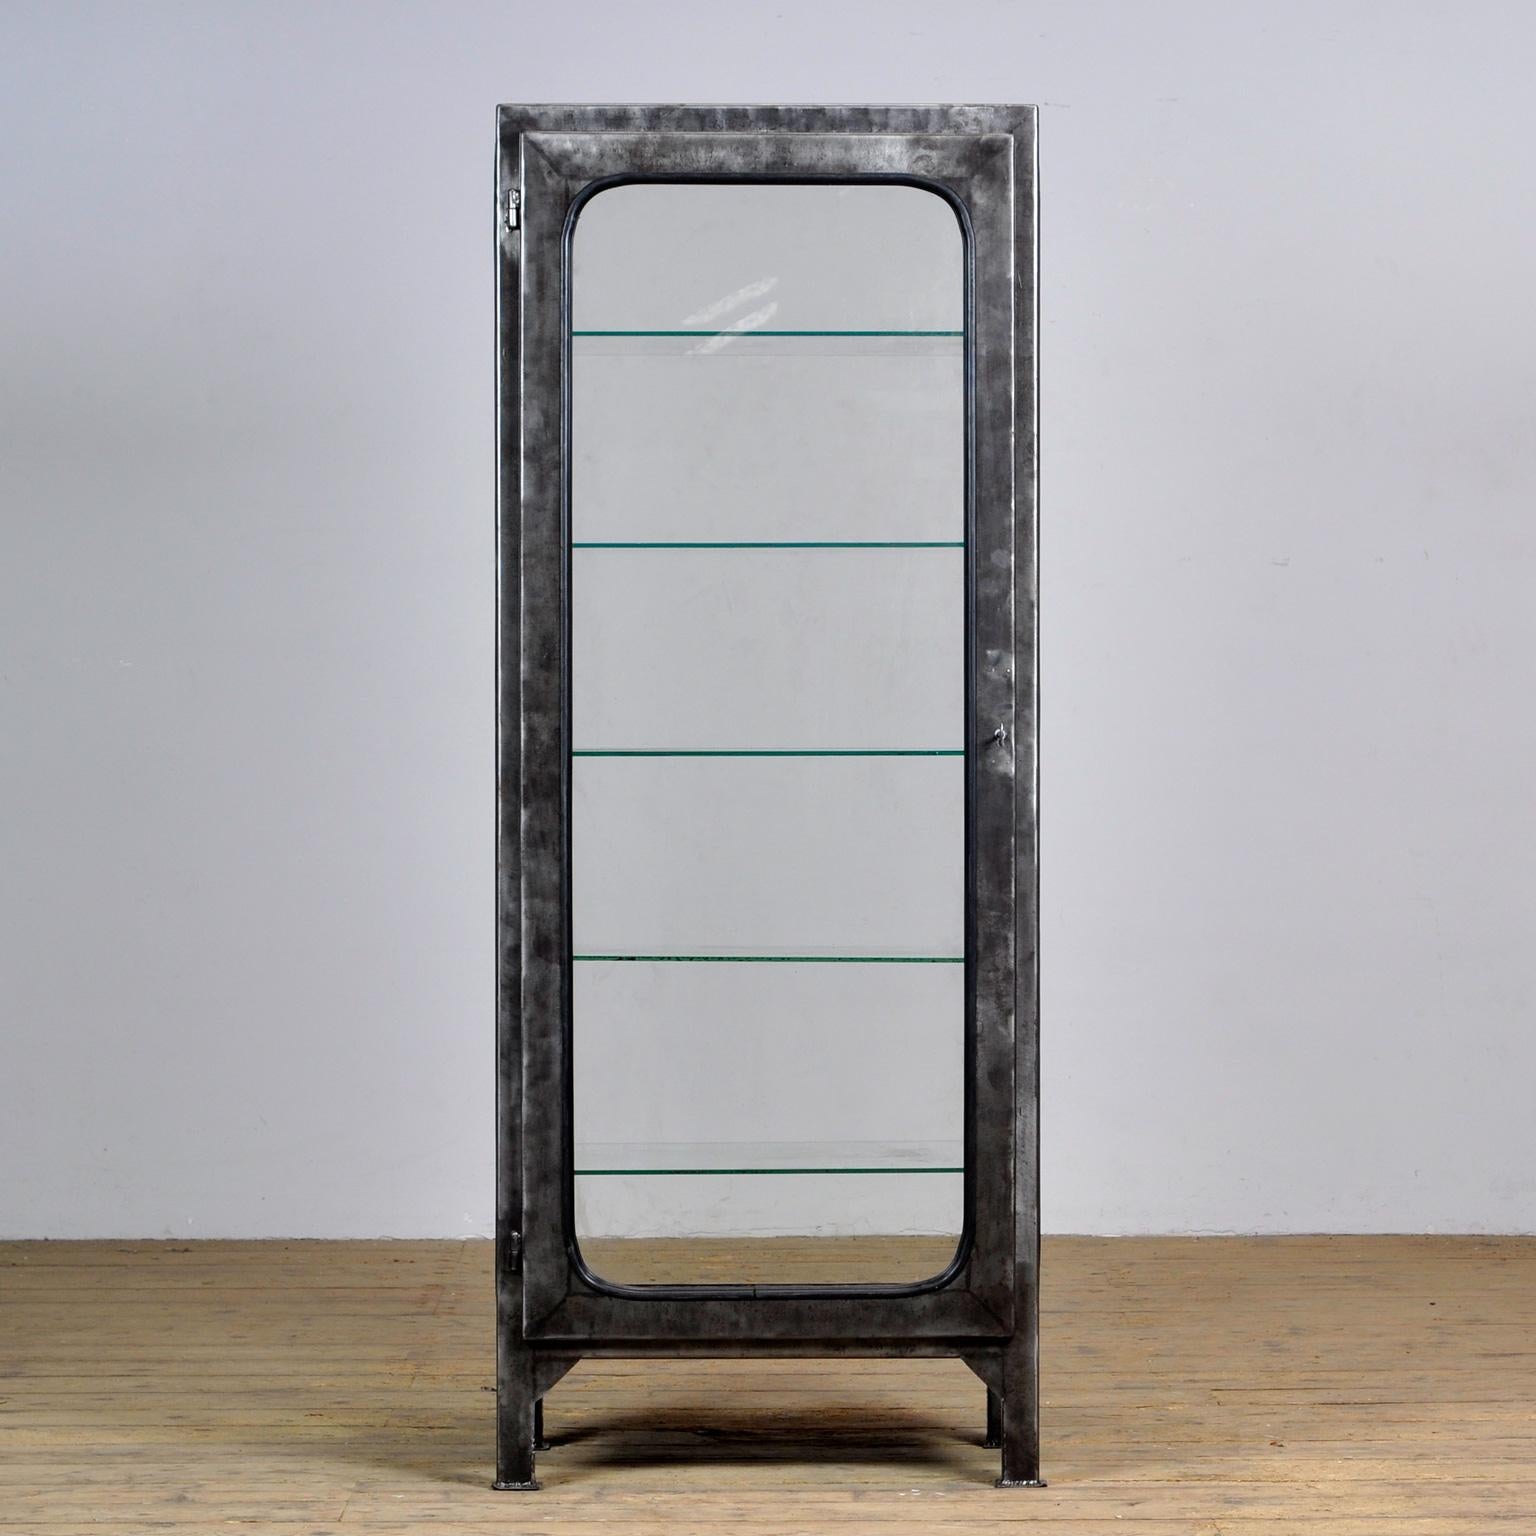 This medical cabinet was designed in the 1970s and was produced circa 1975 in Hungary. It is made from iron and glass, which is held by a black rubber strip. With glass on all four sides. The item has been stripped from its paint and finished with a